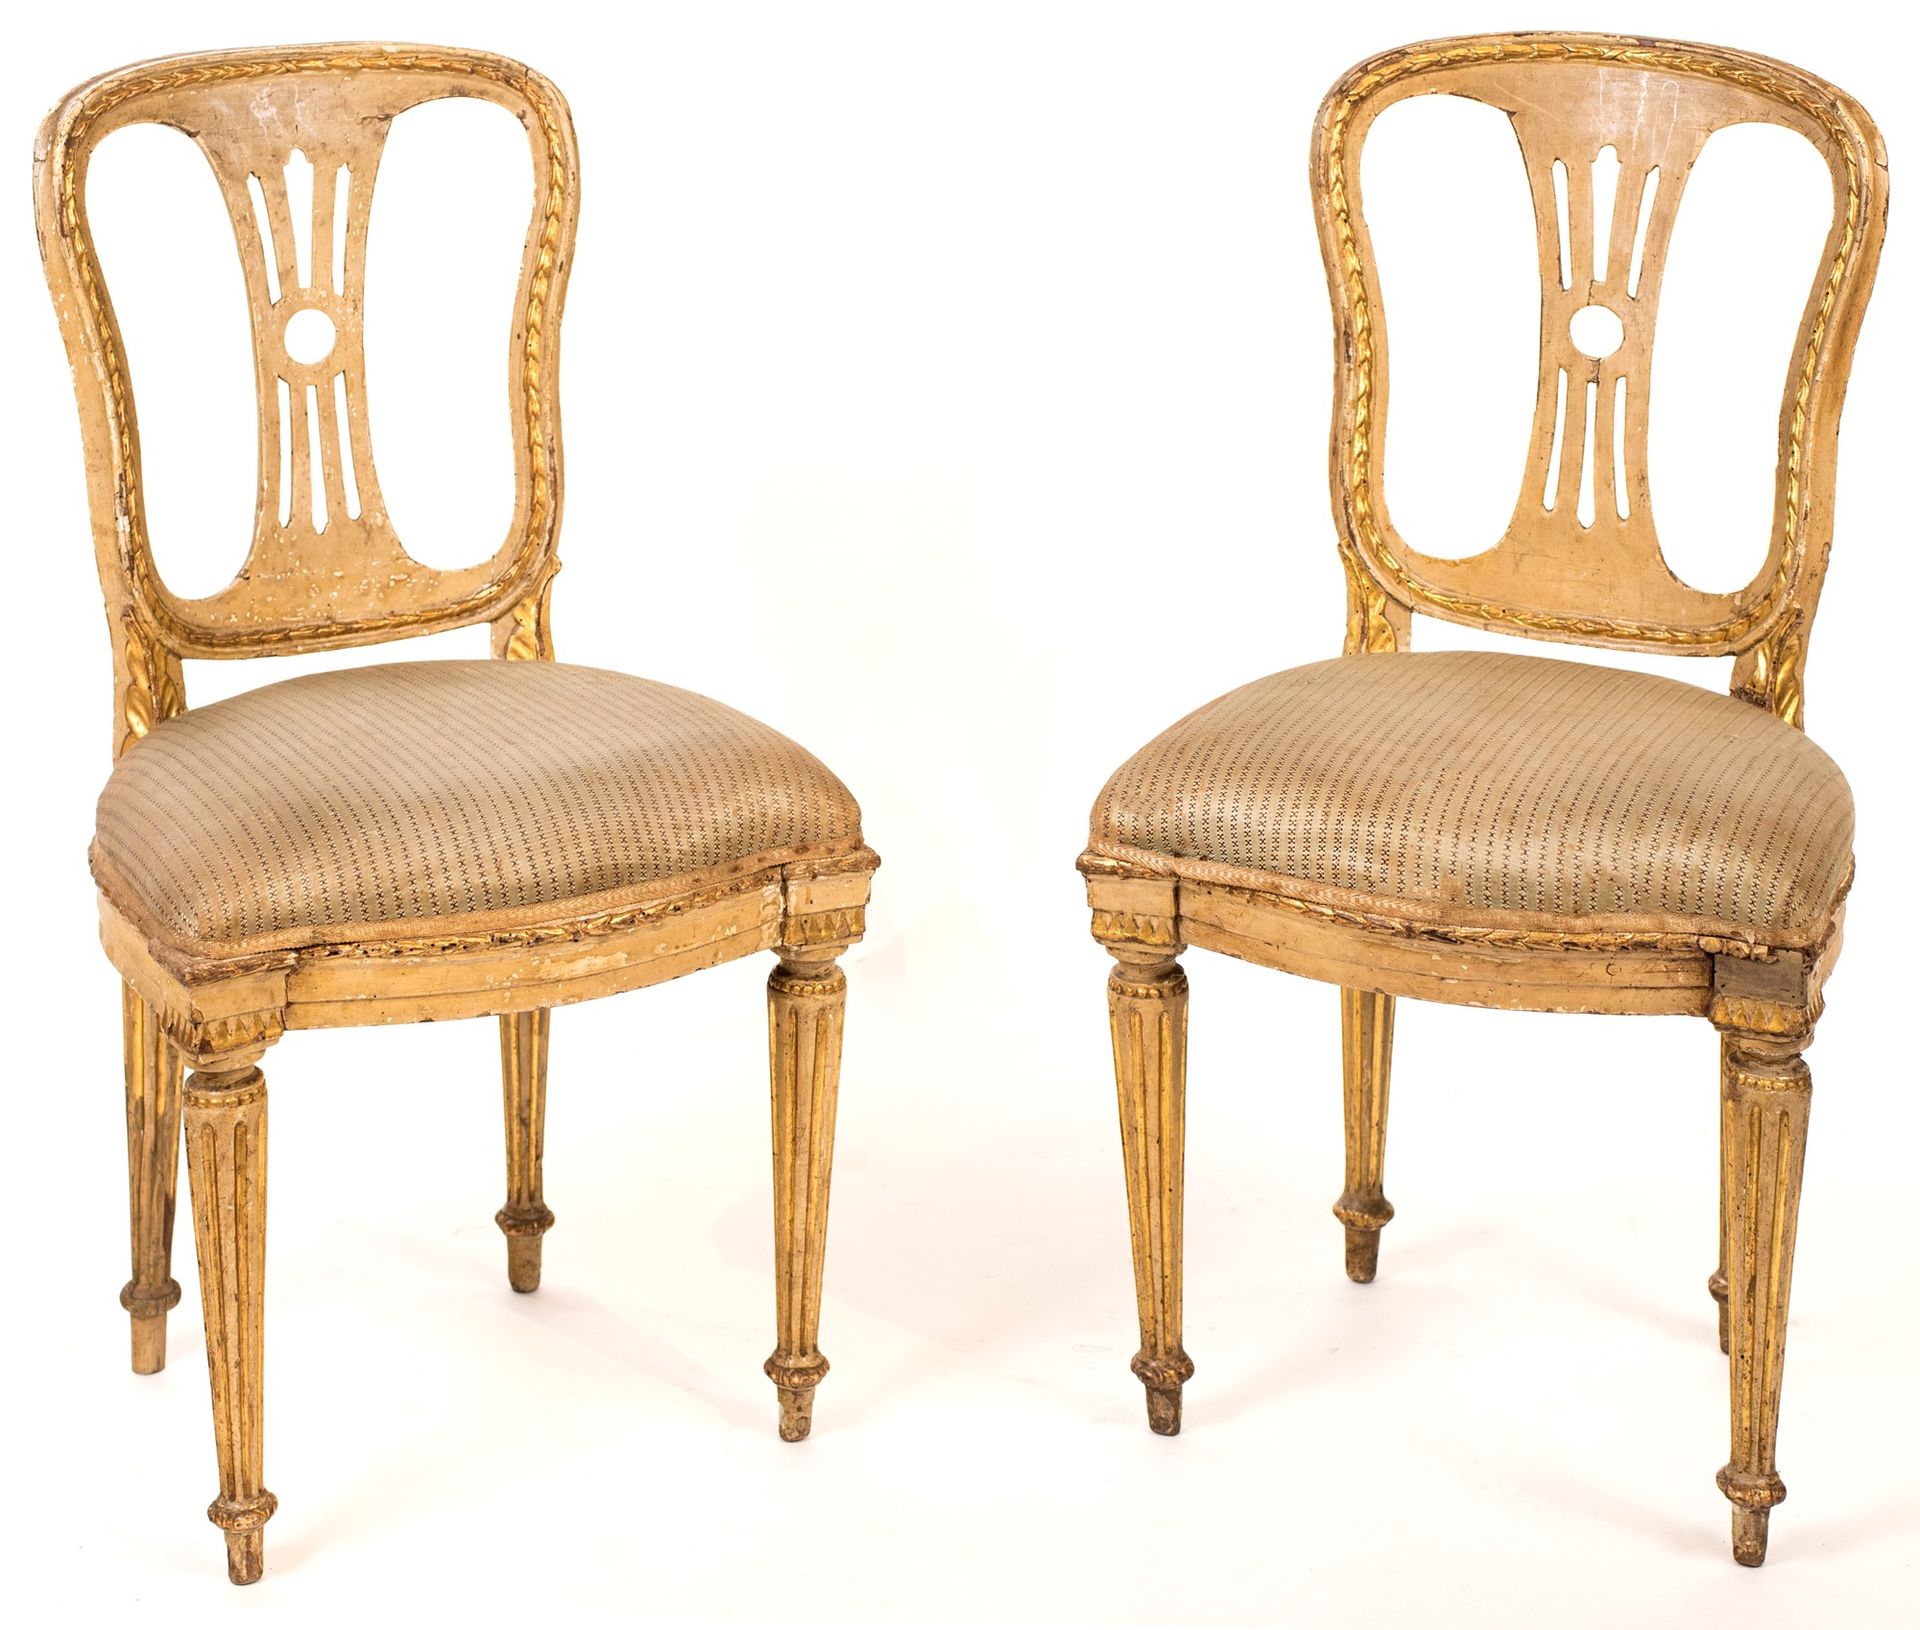 Pair of chairs in lacquered wood, late 18th century gilded along the profiles an&hellip;